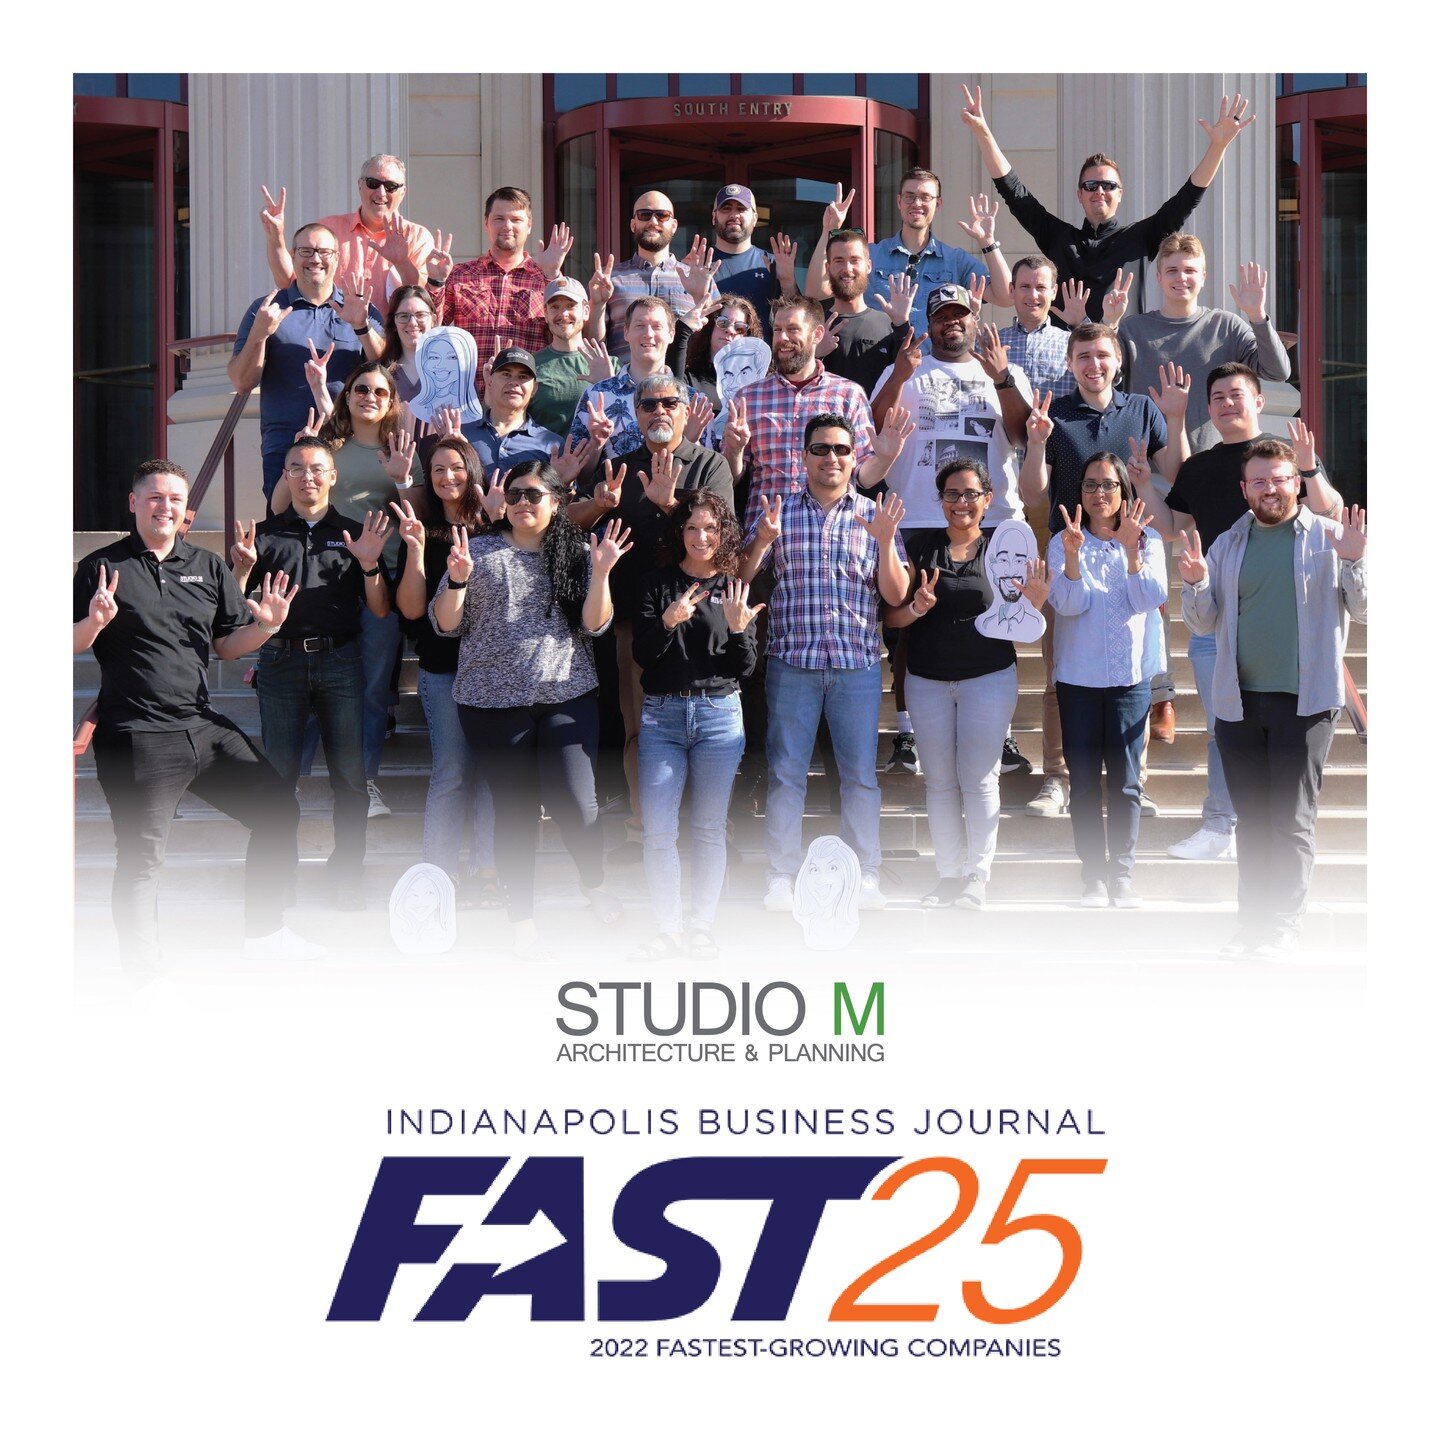 We are ecstatic to announce that we are on the Indianapolis Business Journal&rsquo;s FAST 25 (@ibjnews) , 2022 FASTEST-GROWING COMPANIES! We are extremely grateful for our devoted, talented and light-hearted team whose passion about the built environ